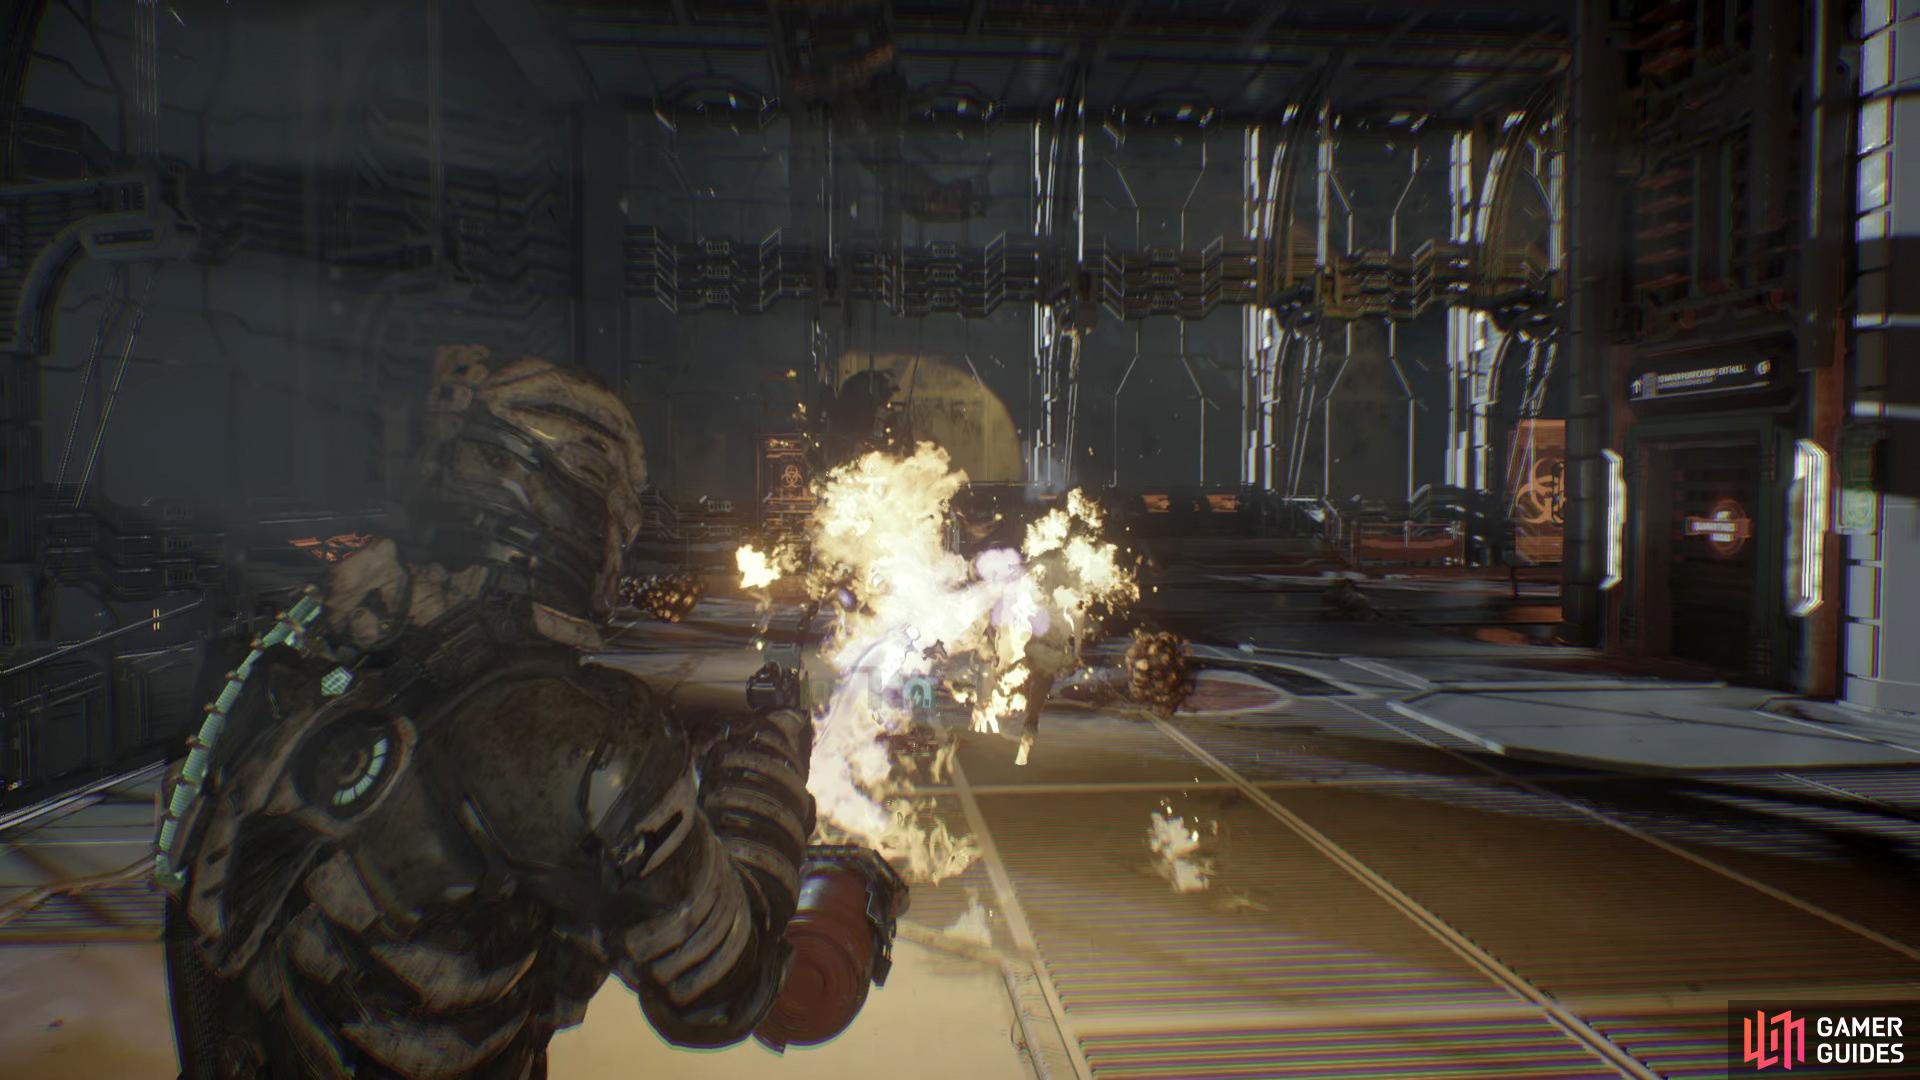 The Flamethrower's Primary Fire will continuously spray out fire.